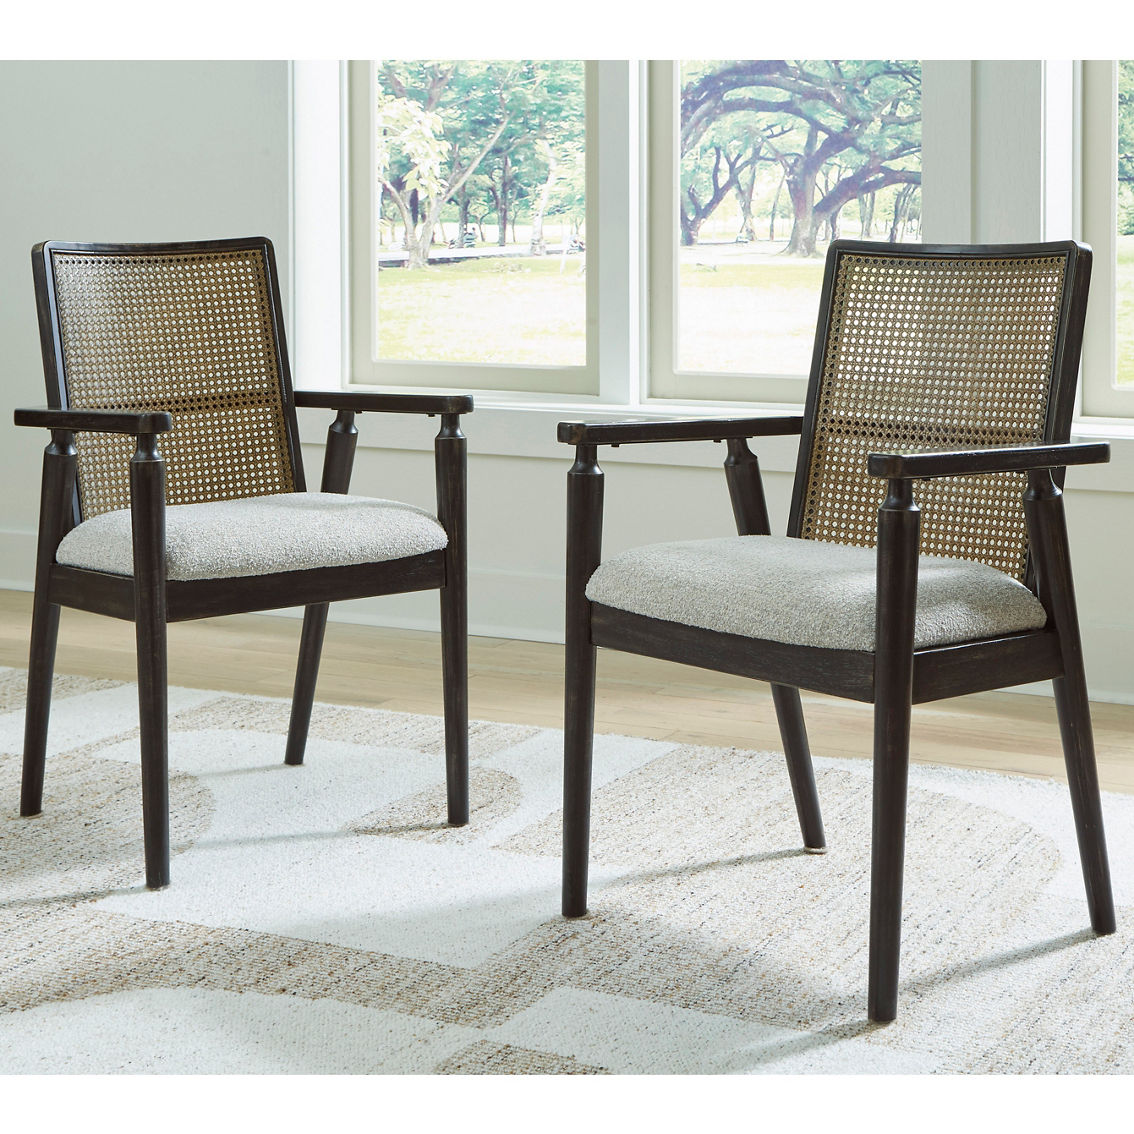 Signature Design by Ashley Galliden 7 pc. Dining Set: Table, 4 Sides, 2 Arm Chairs - Image 4 of 9